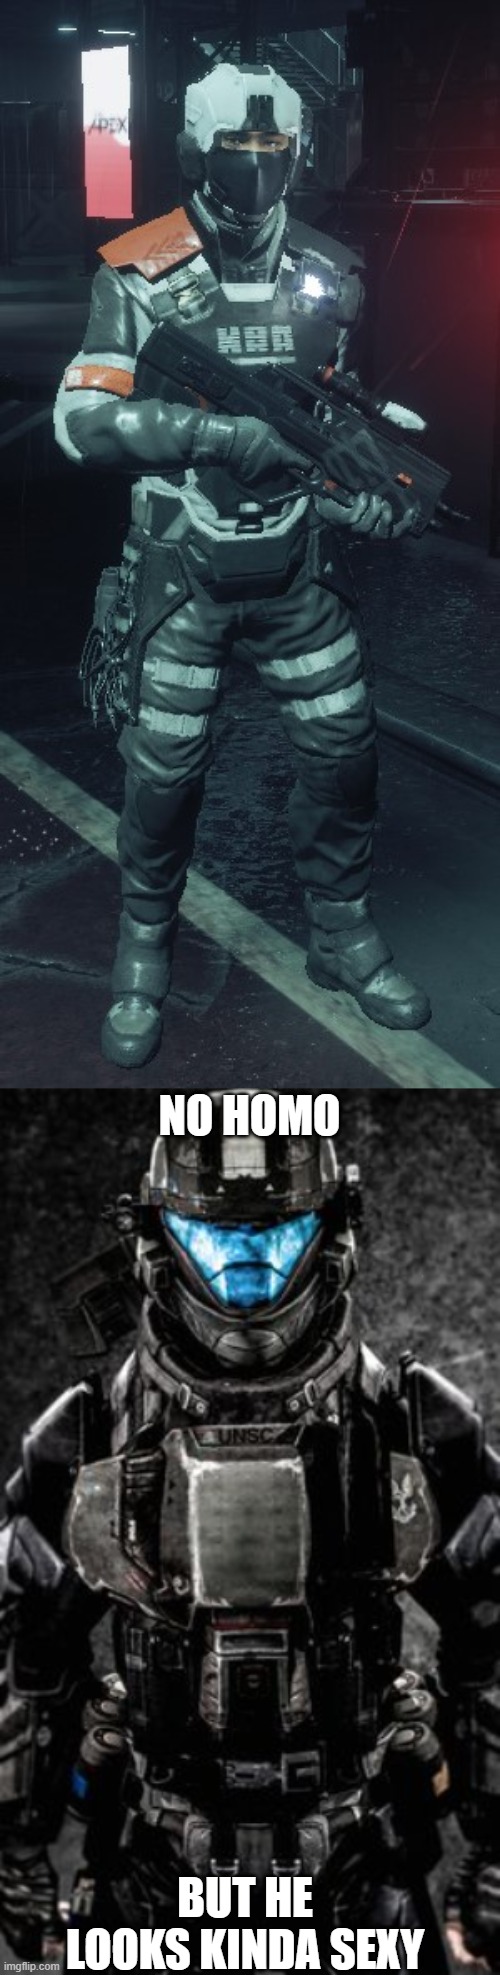 NO HOMO; BUT HE LOOKS KINDA SEXY | image tagged in kpa soldier,odst | made w/ Imgflip meme maker